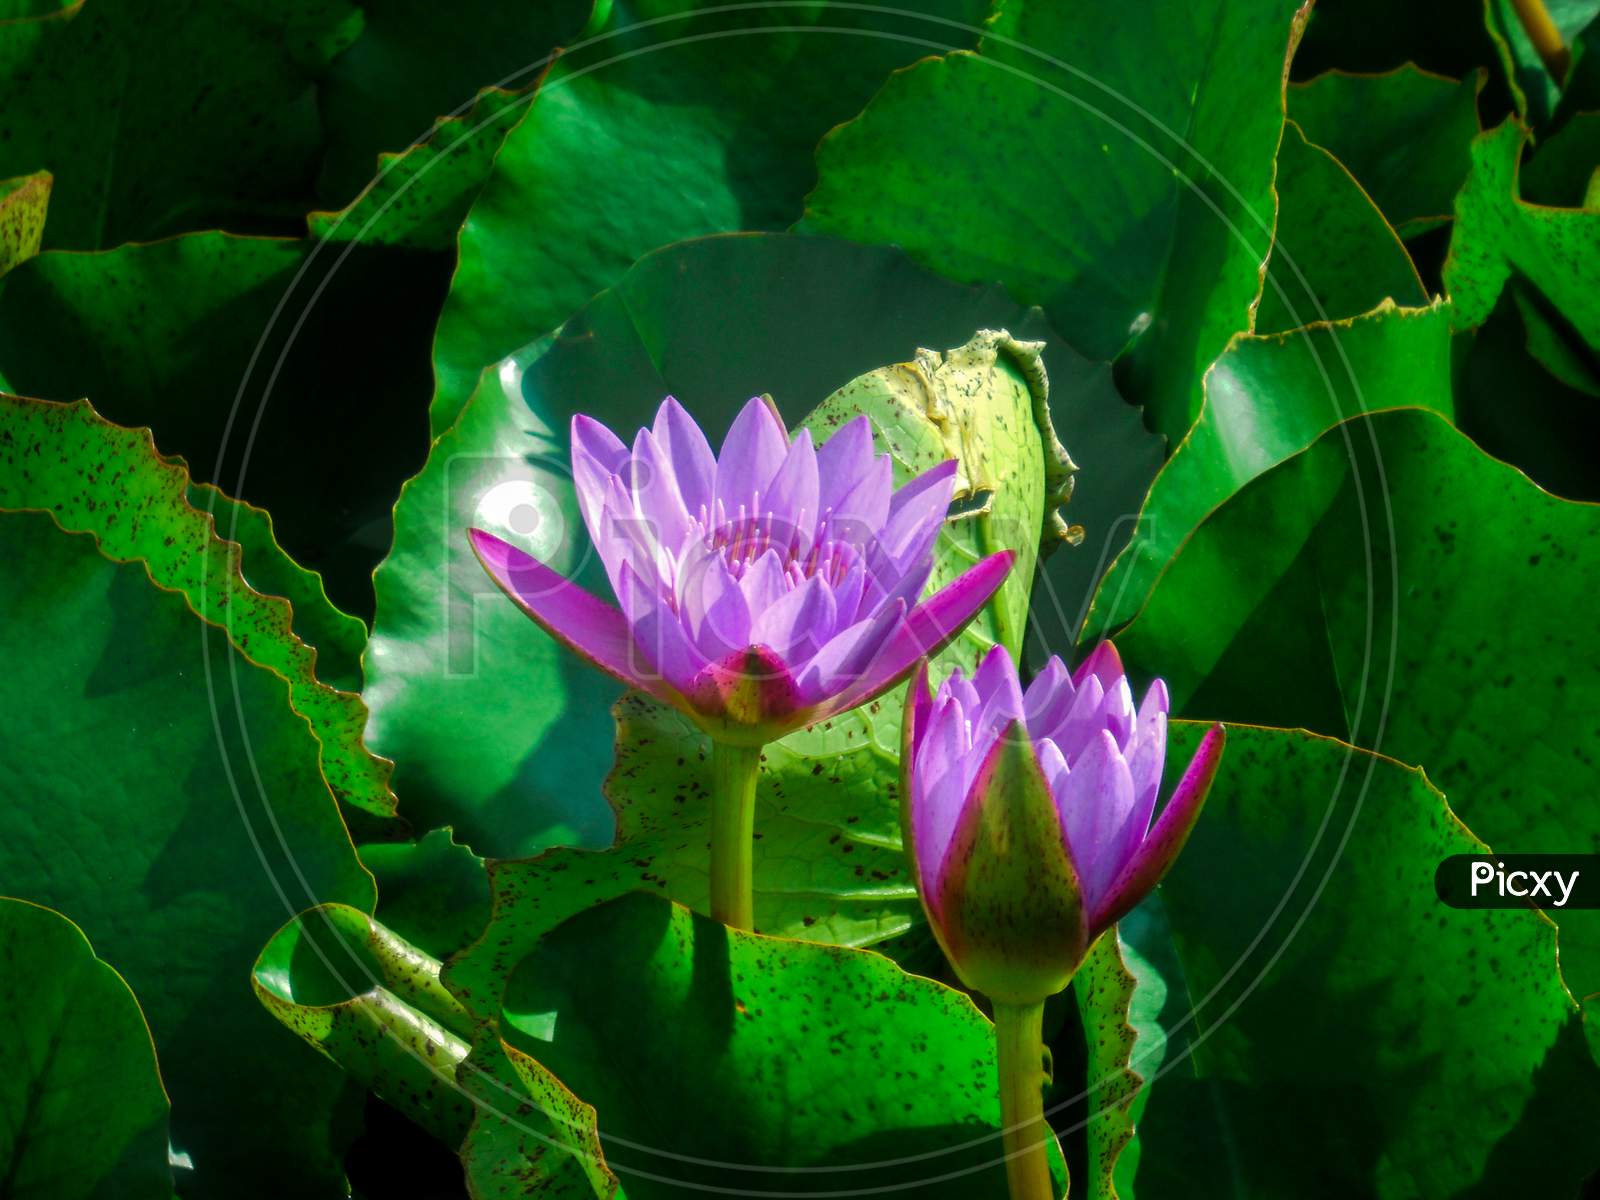 Two Isolated Violet Lotus Flowers In The Pond Surrounded By The Green Leaves.